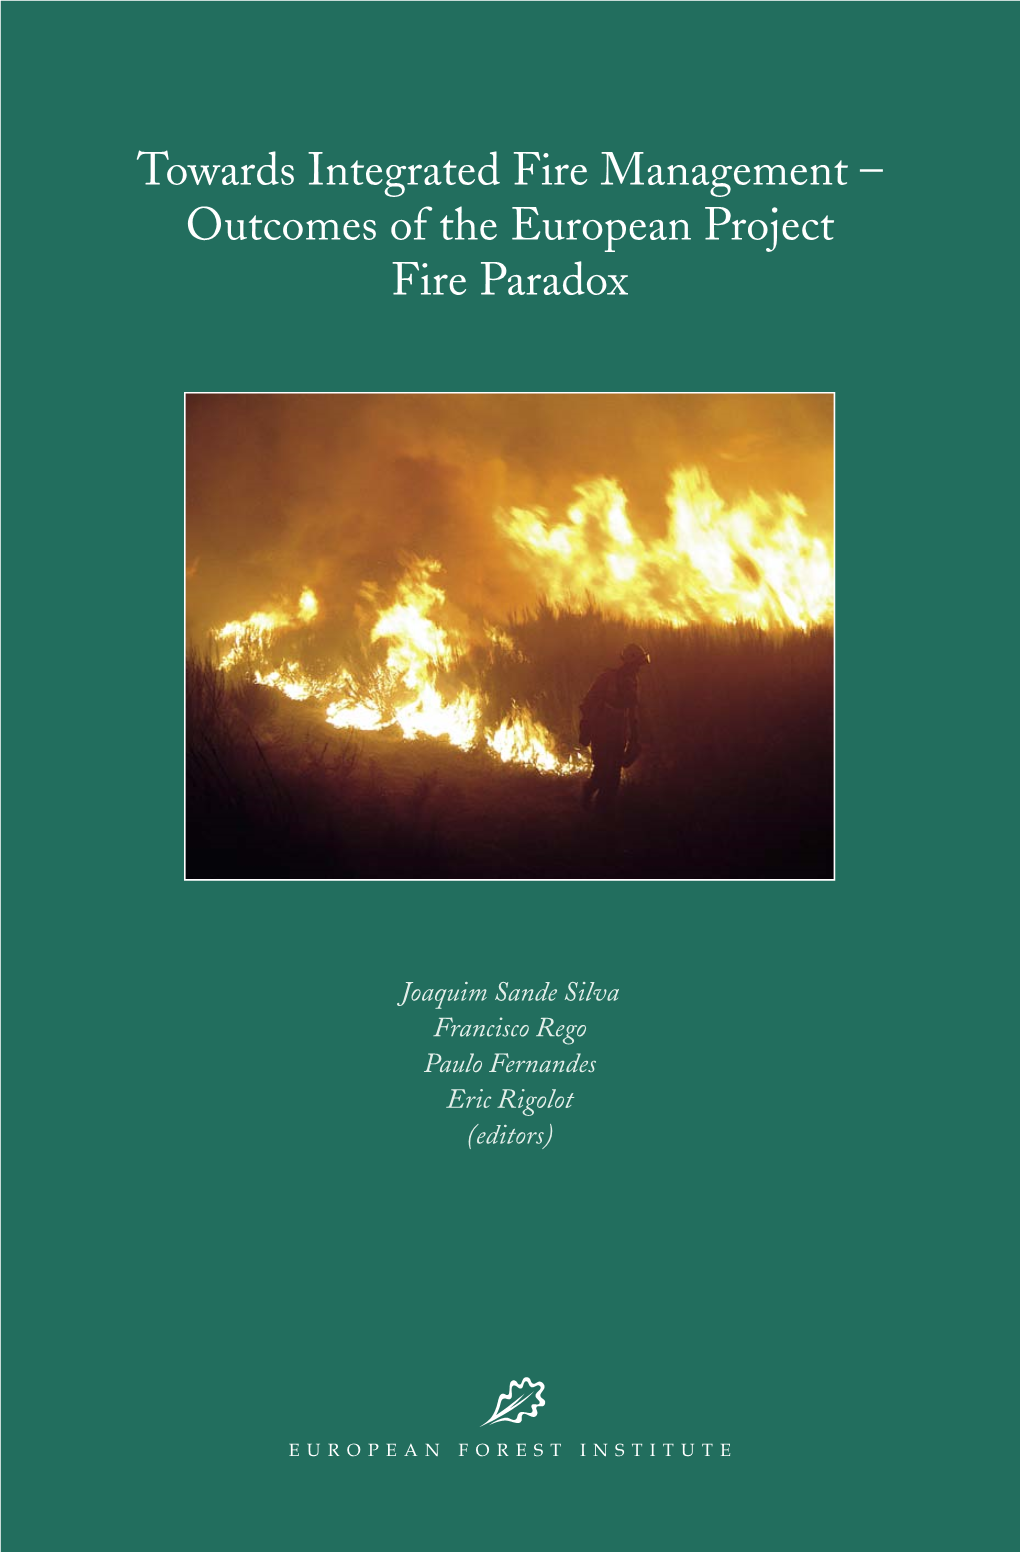 Towards Integrated Fire Management – Outcomes of the European Project Fire Paradox